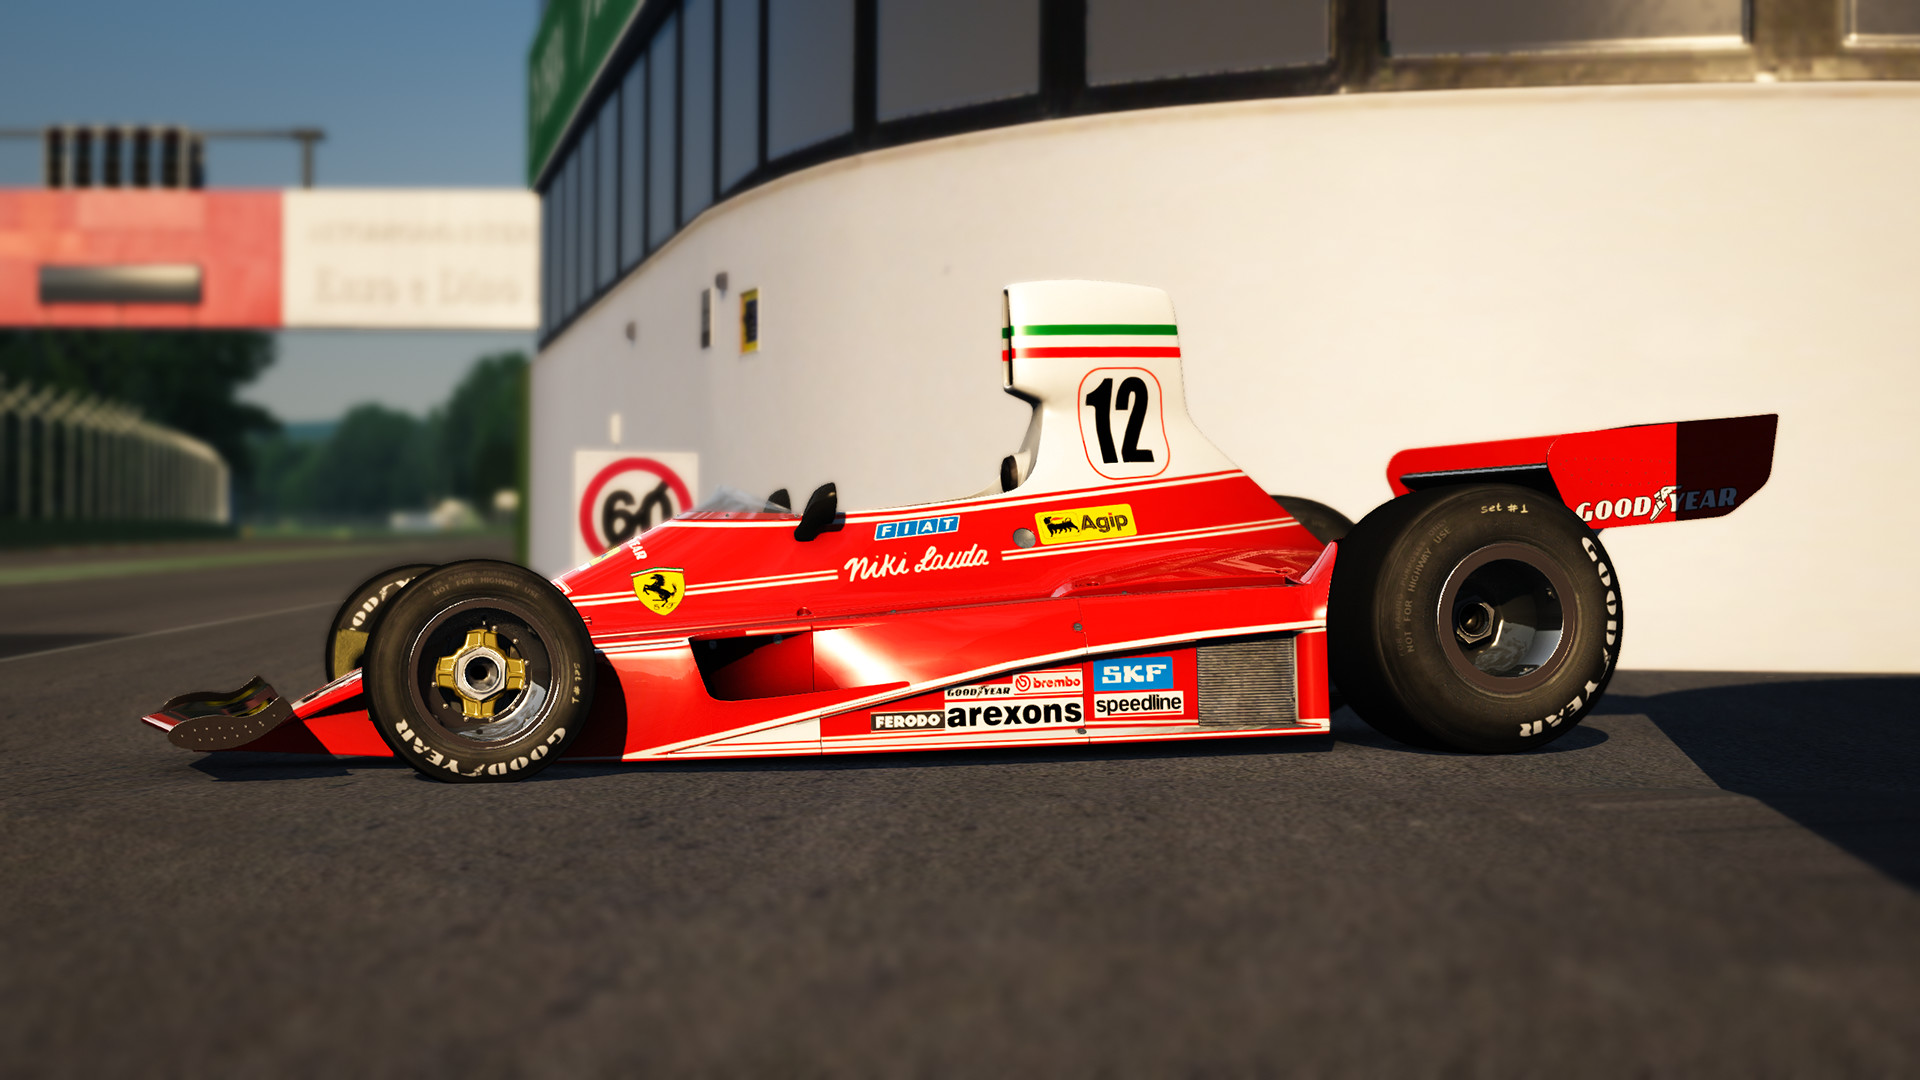 assetto corsa pc without wheel